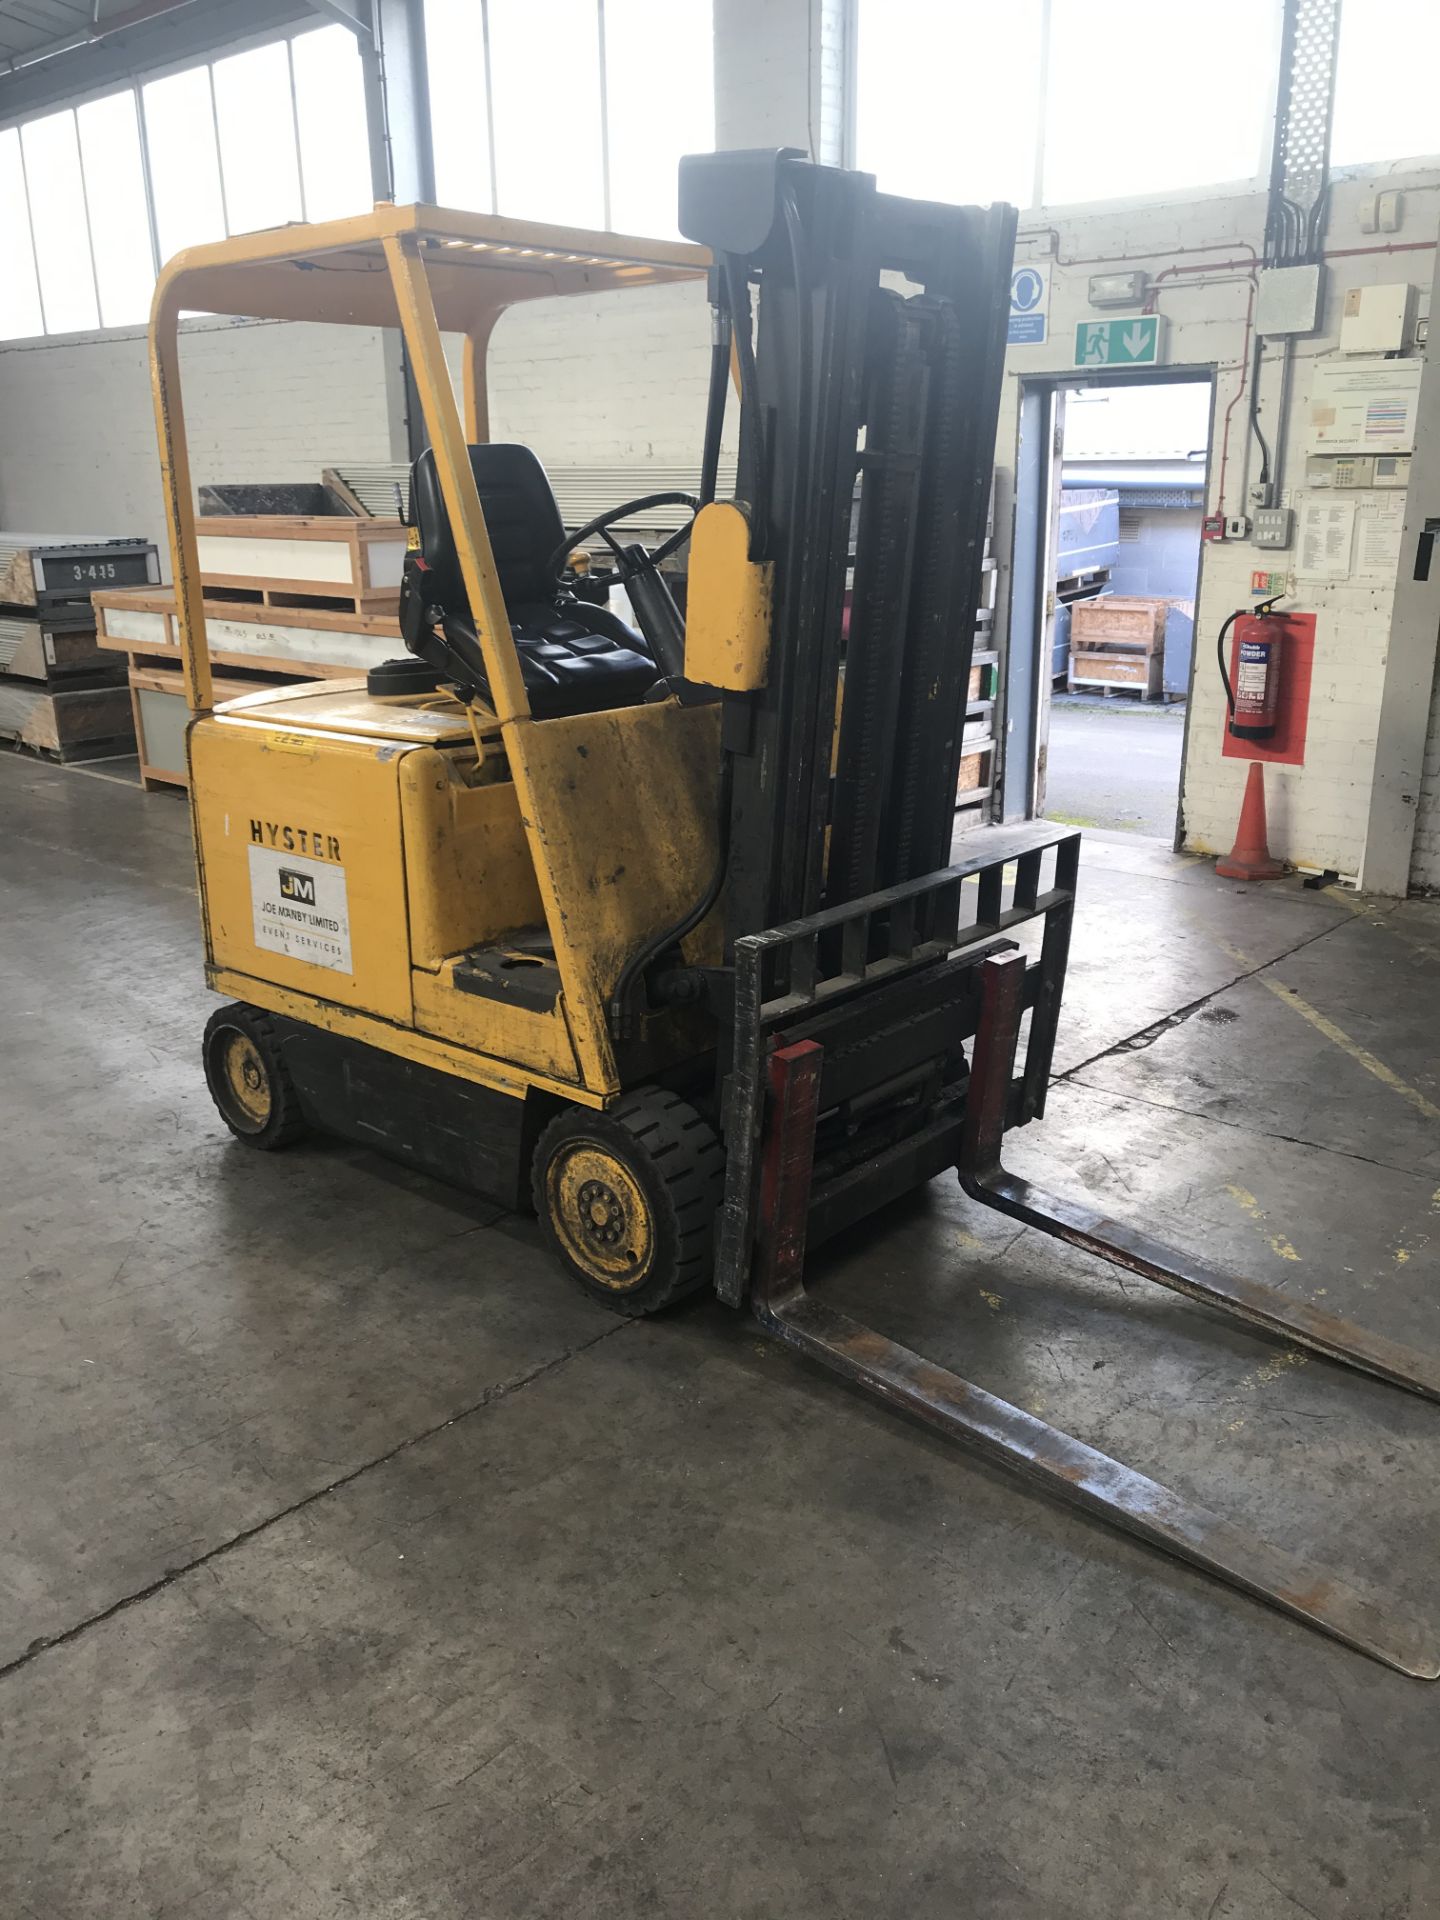 Hyster E50A Electric Forklift Truck, registration - Image 2 of 4